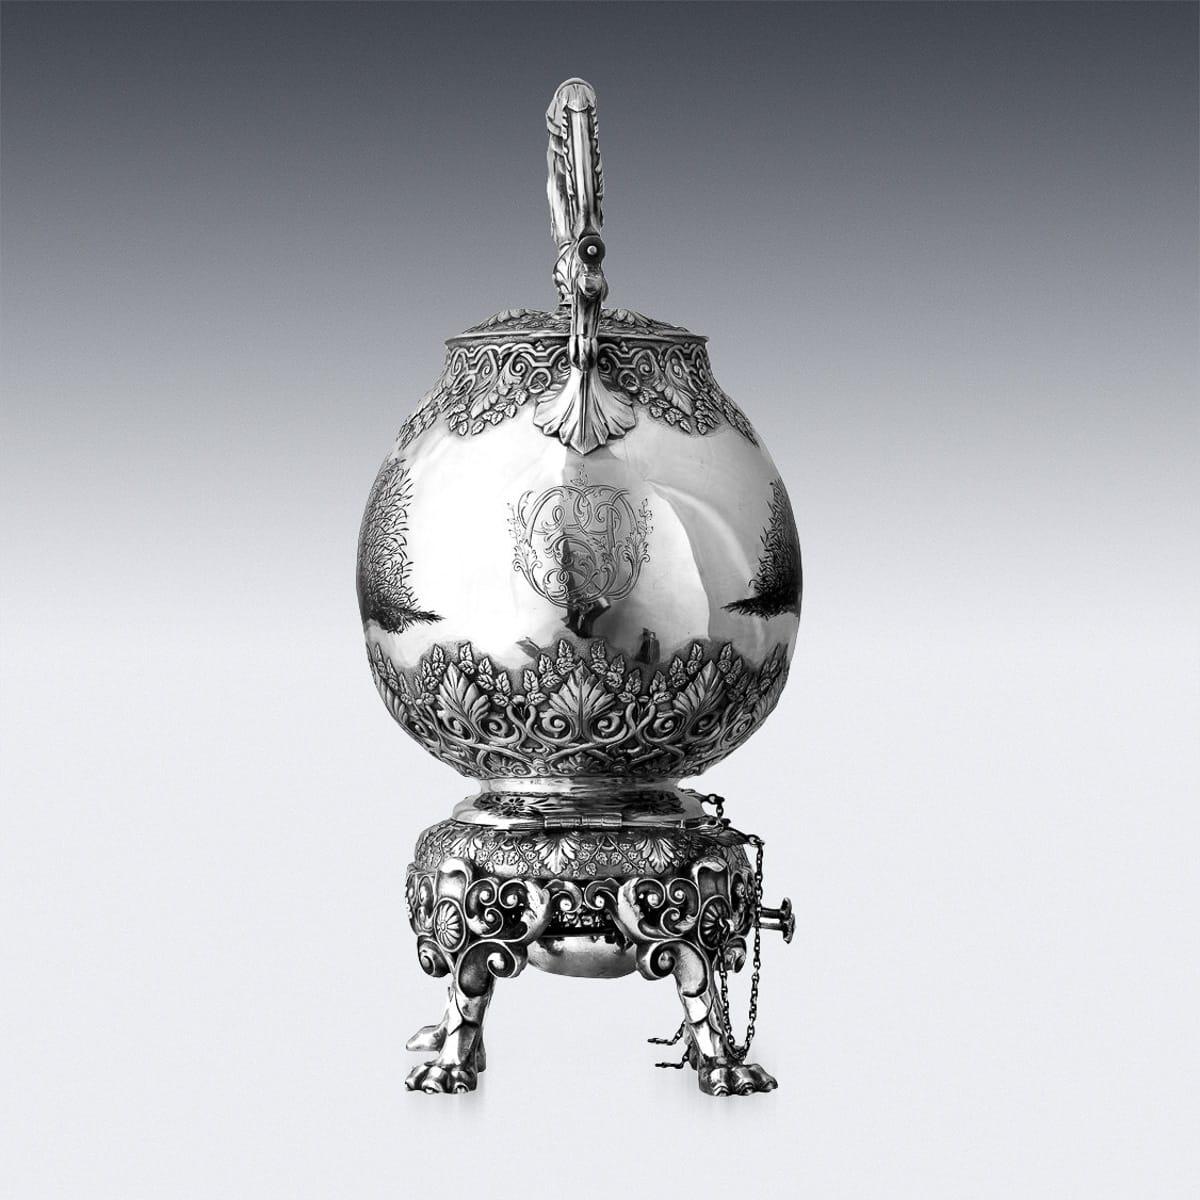 Antique 19th century imperial Russian rare solid silver and enamel tea kettle on stand, the bullet shaped body chased with leave and scrolled decoration, standing on four cast lion paw feet, mounted with a scroll shaped swing handle and leaf capped